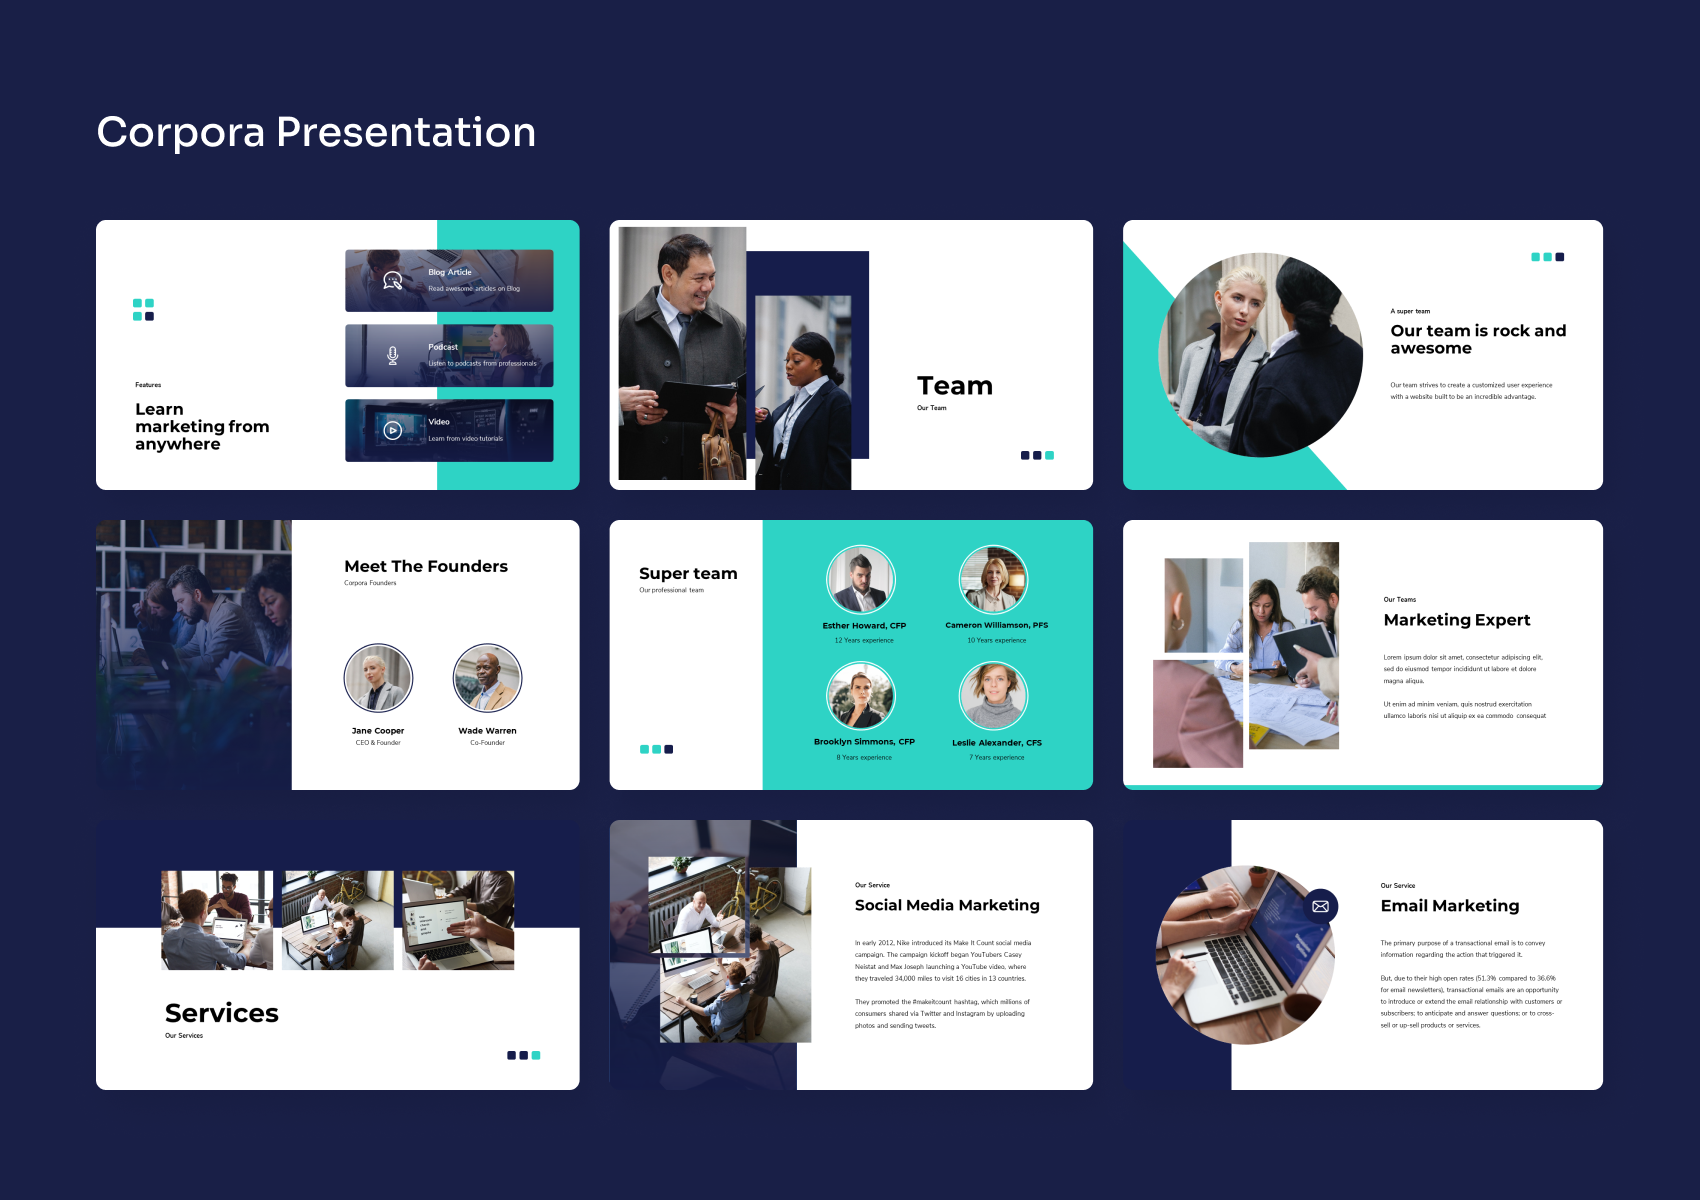 Corpora - Corporate Power Point Presentation by mhudaaa | GraphicRiver